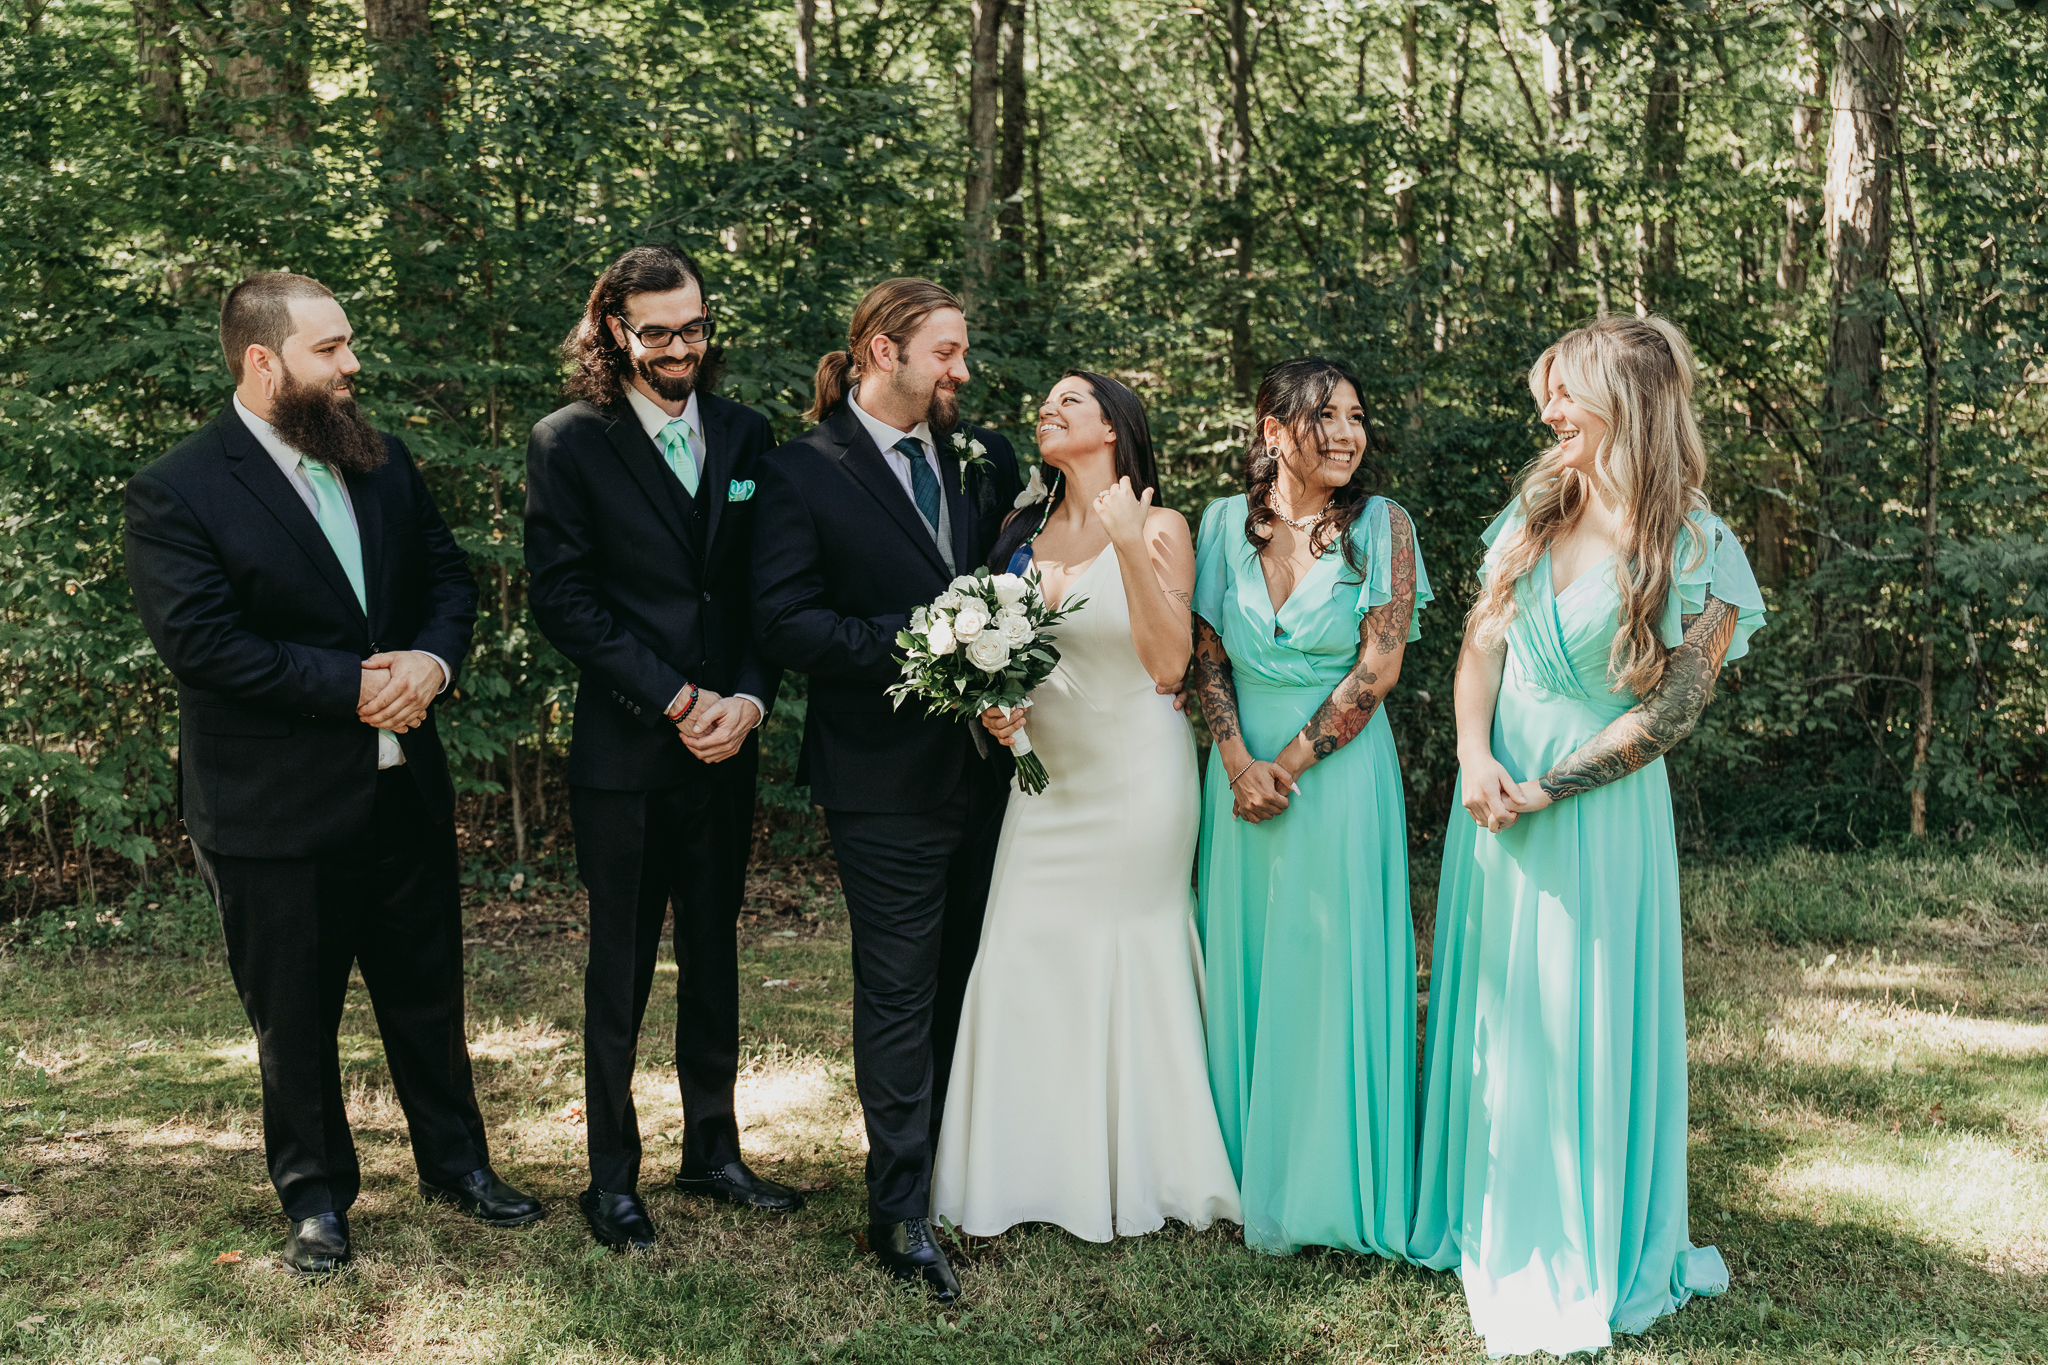 bridal party back yard wedding new paltz new york crys torres photography